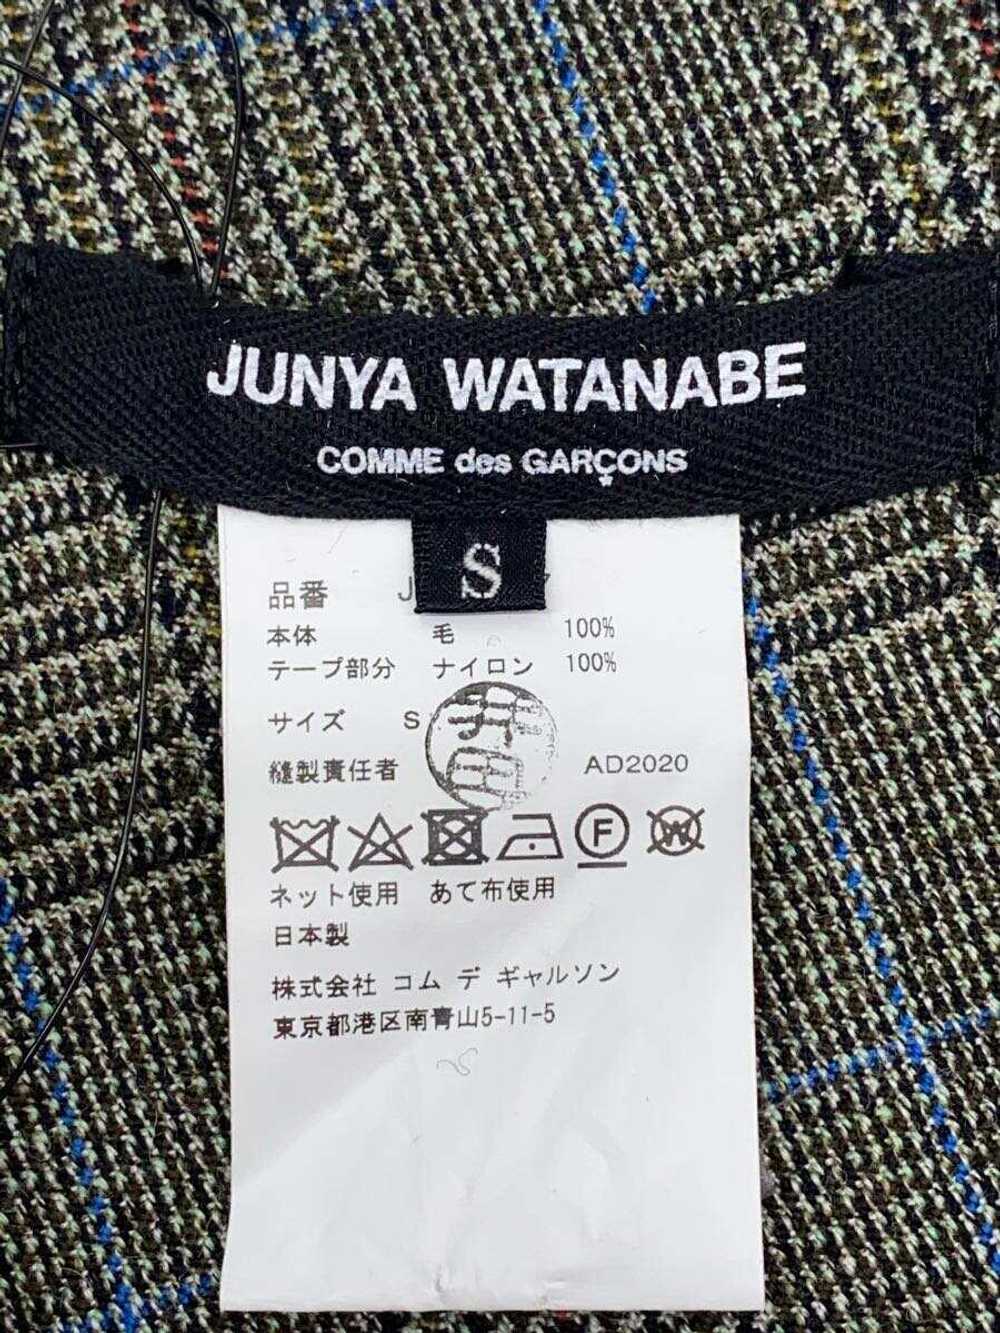 Used Junya Watanabe Comme Des Garcons Overalls/Dr… - image 3